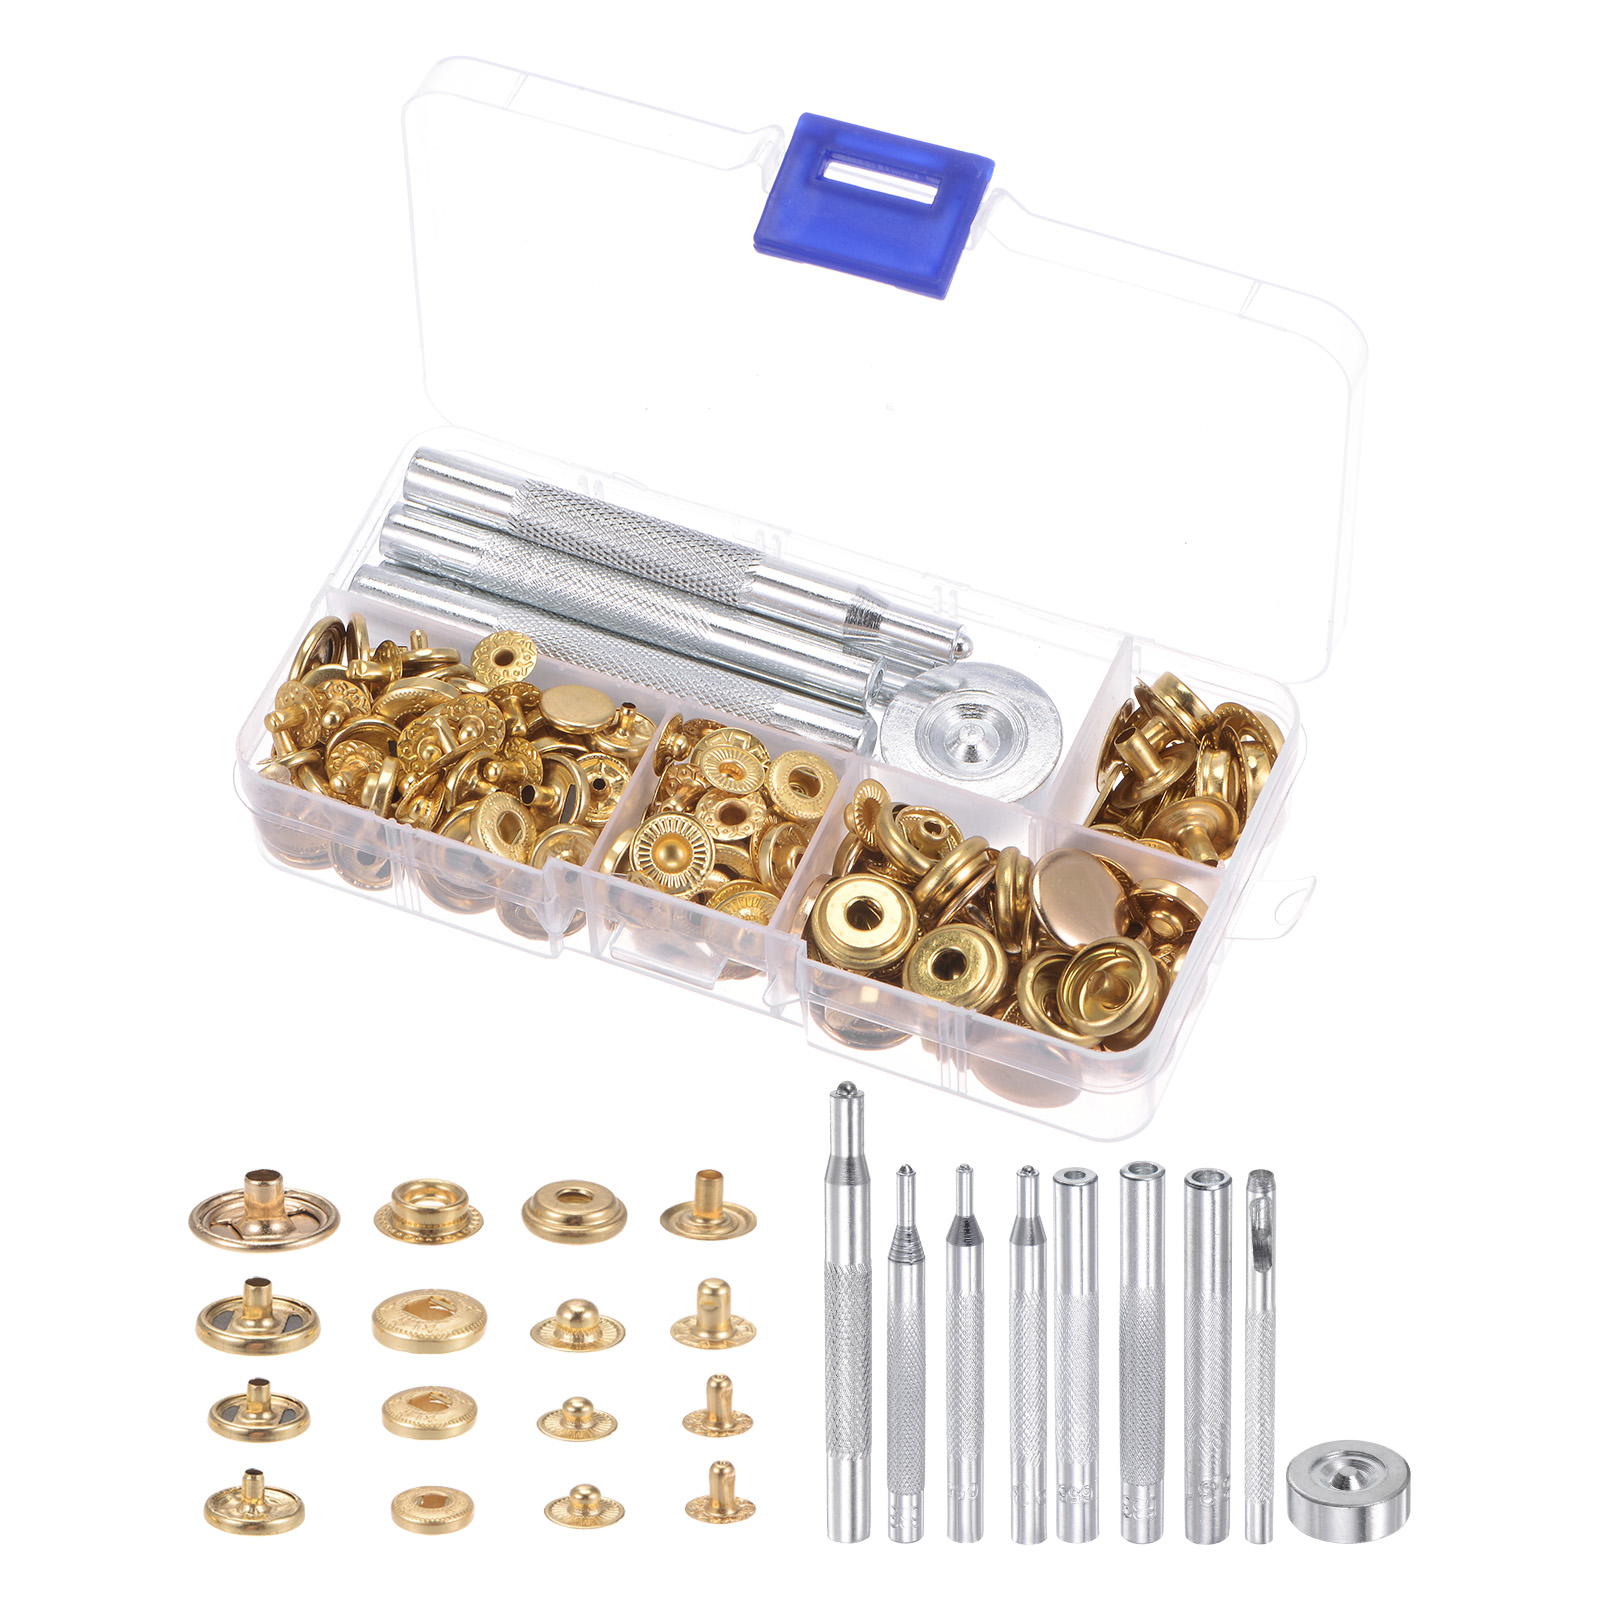 Unique Bargains 40 Sets Snap Fasteners Kit 4 Type Copper with 9 Setter Tools & Box, Golden